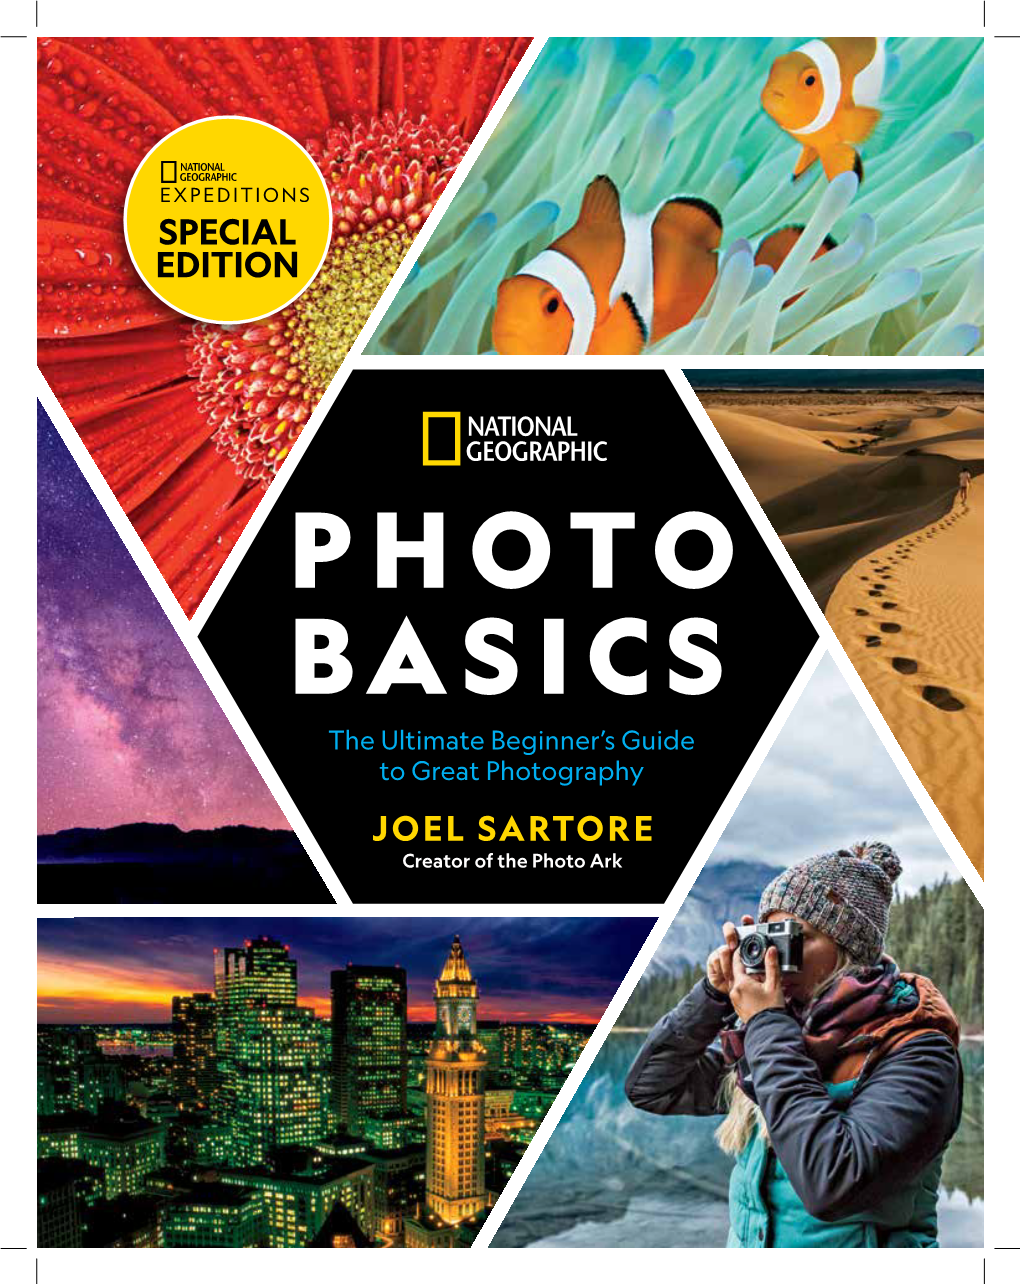 PHOTO BASICS the Ultimate Beginner’S Guide to Great Photography JOEL SARTORE Creator of the Photo Ark CONTENTS